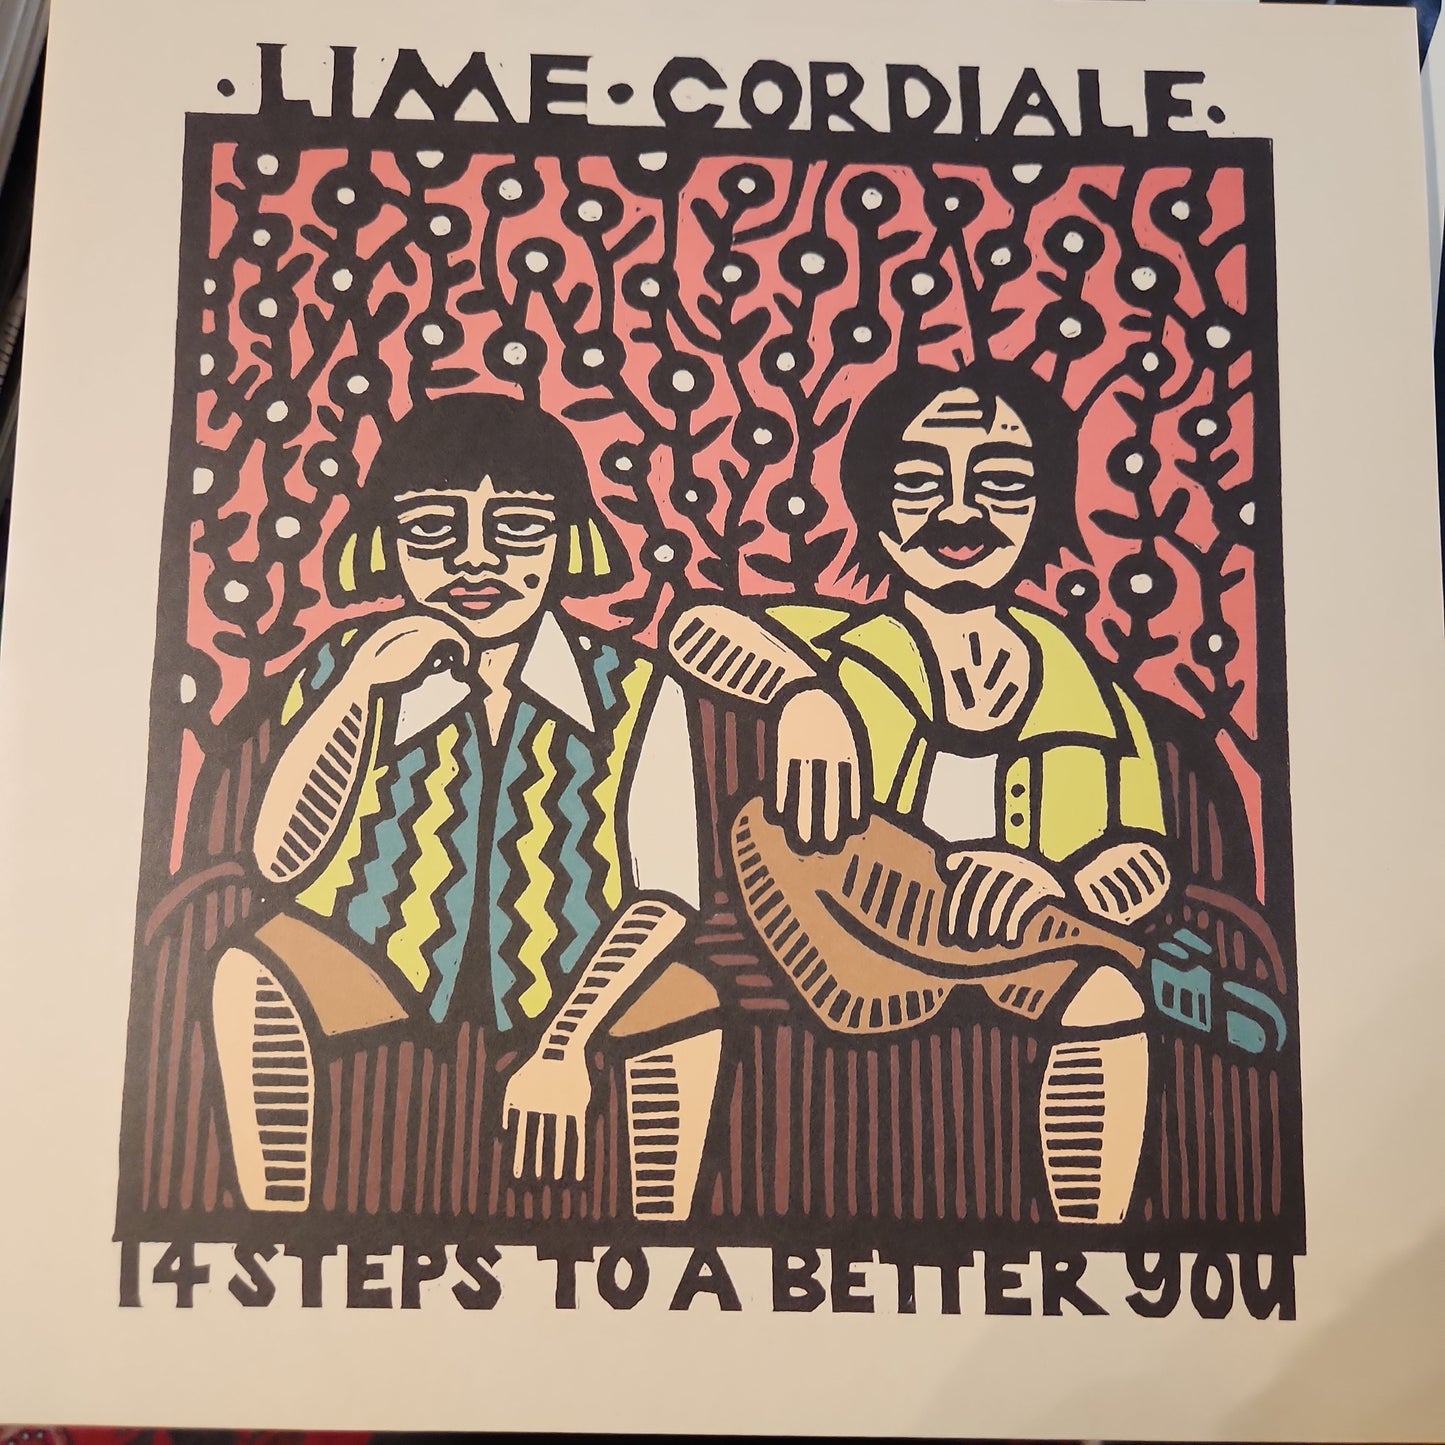 Lime Cordiale - 14 Steps to a better you - Vinyl LP